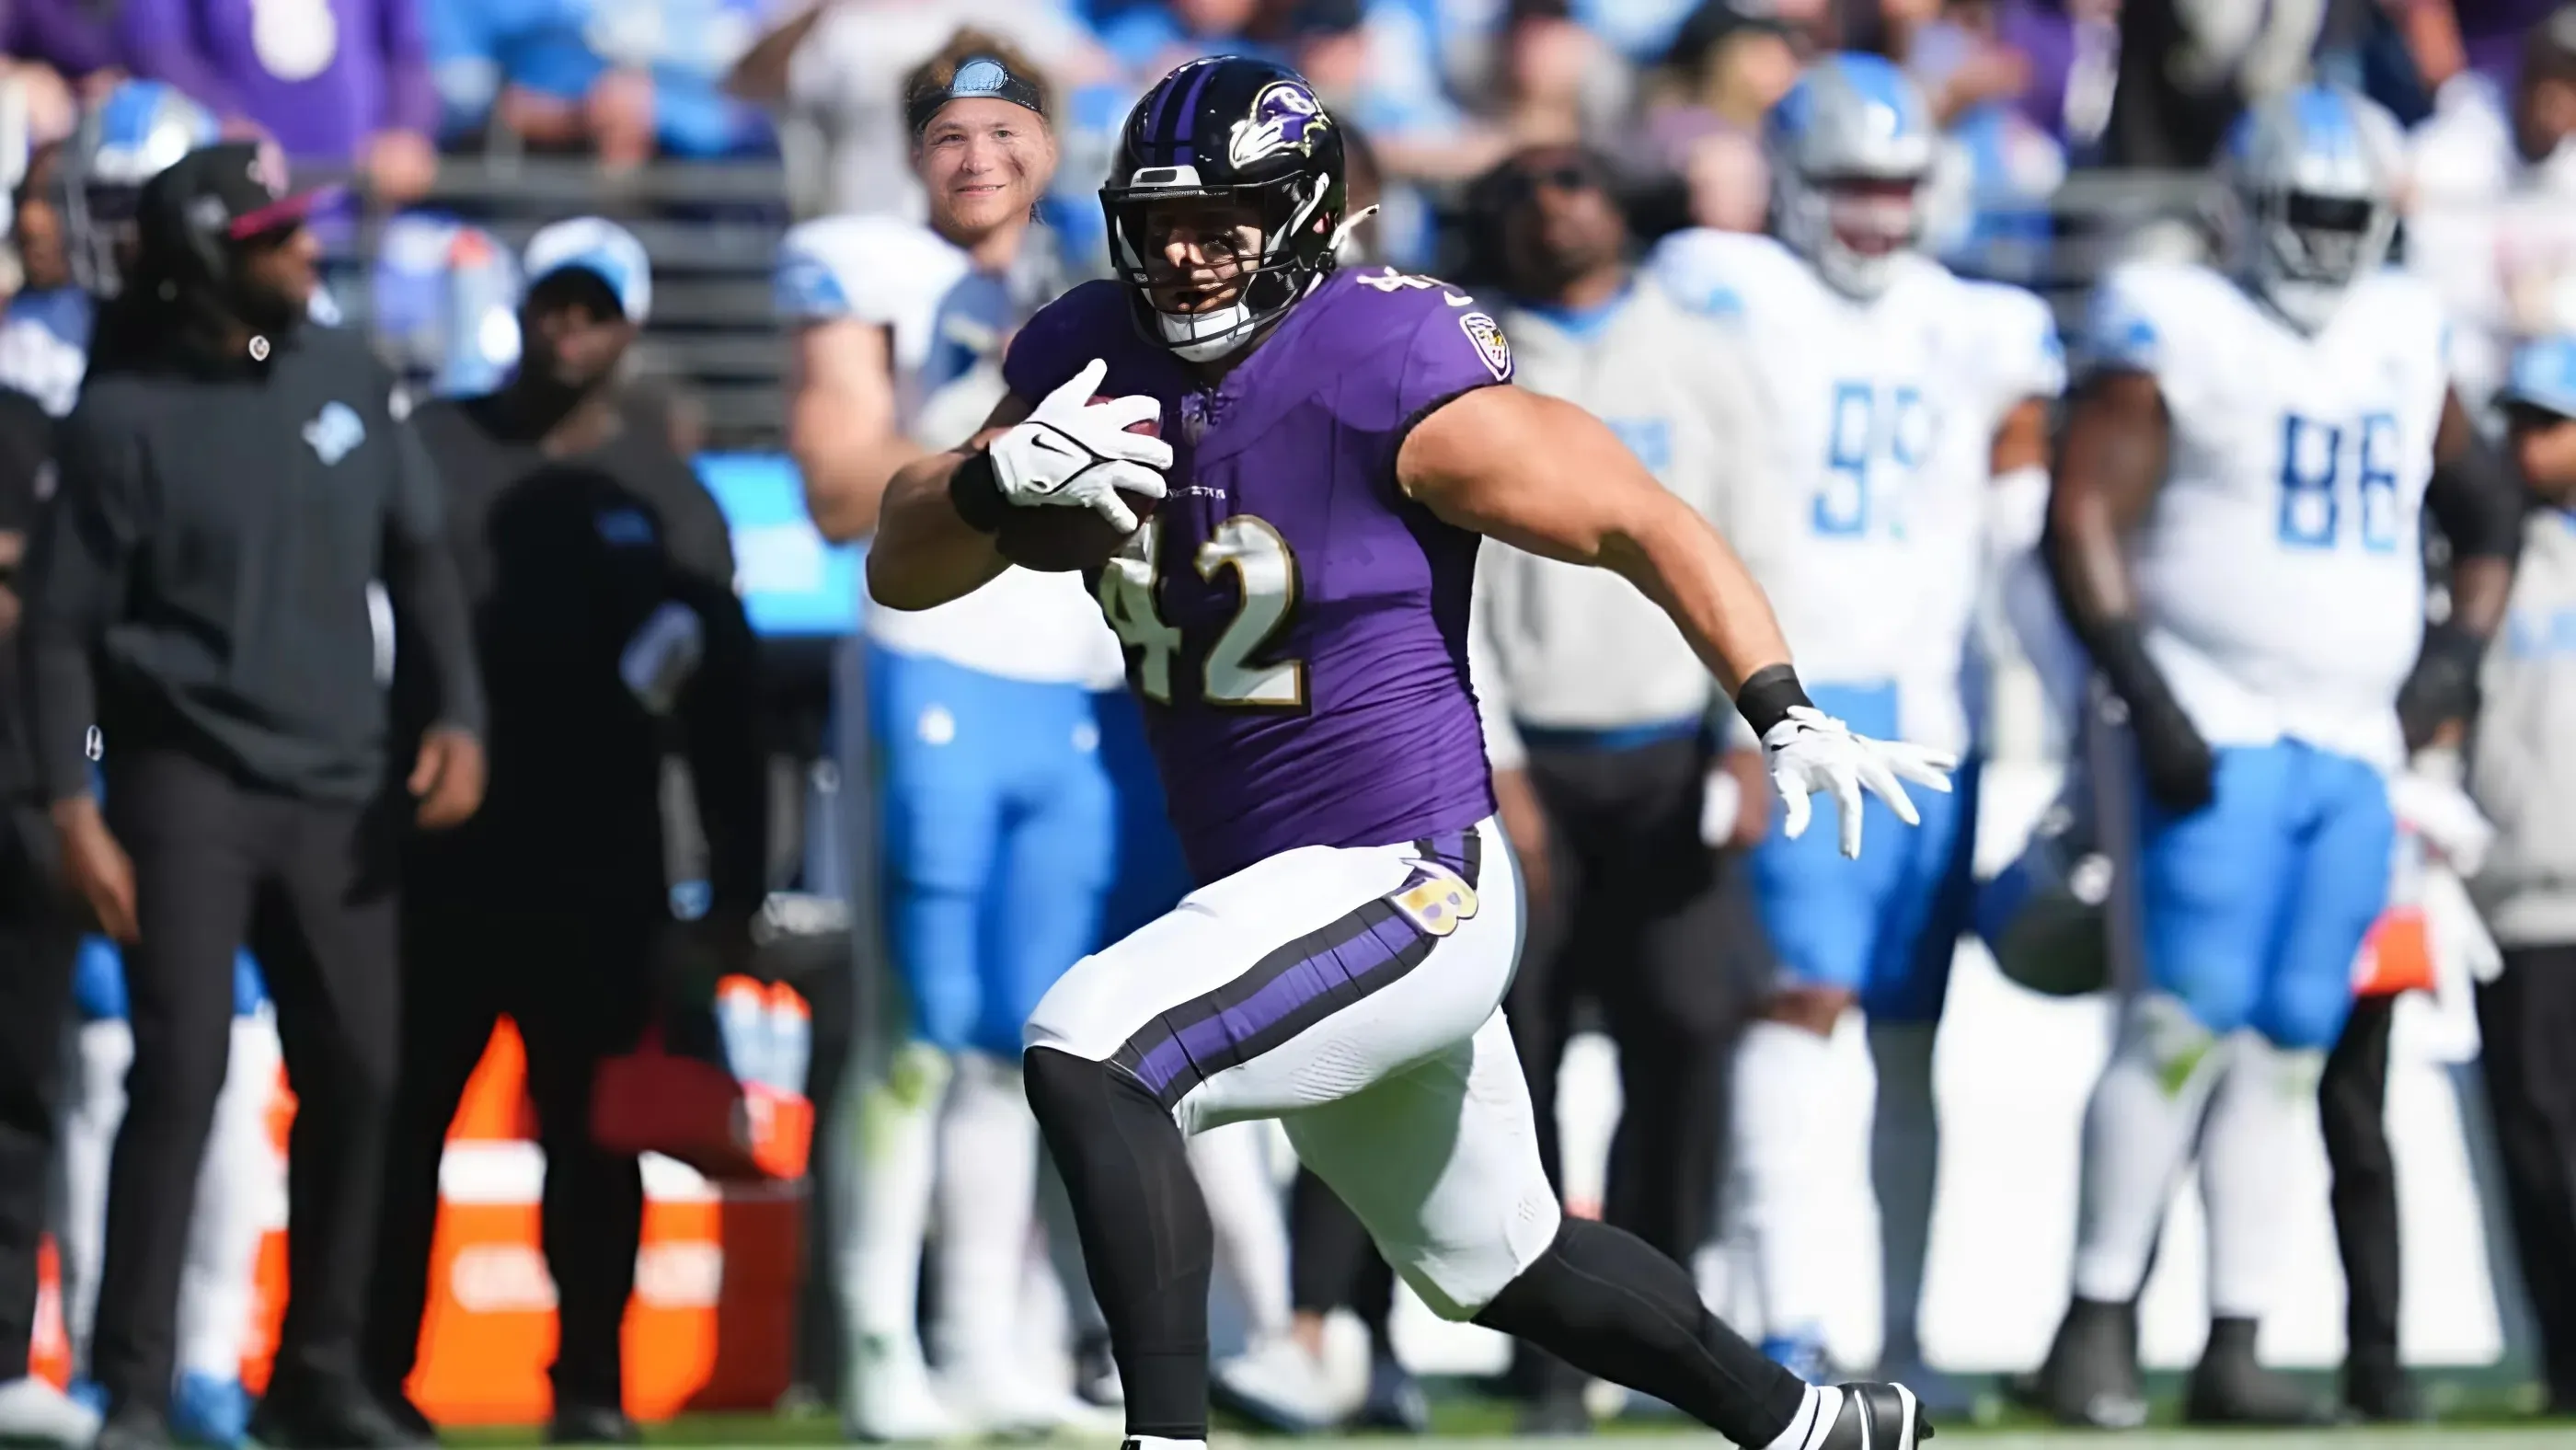 Ravens FB Named Most Under-Appreciated Player